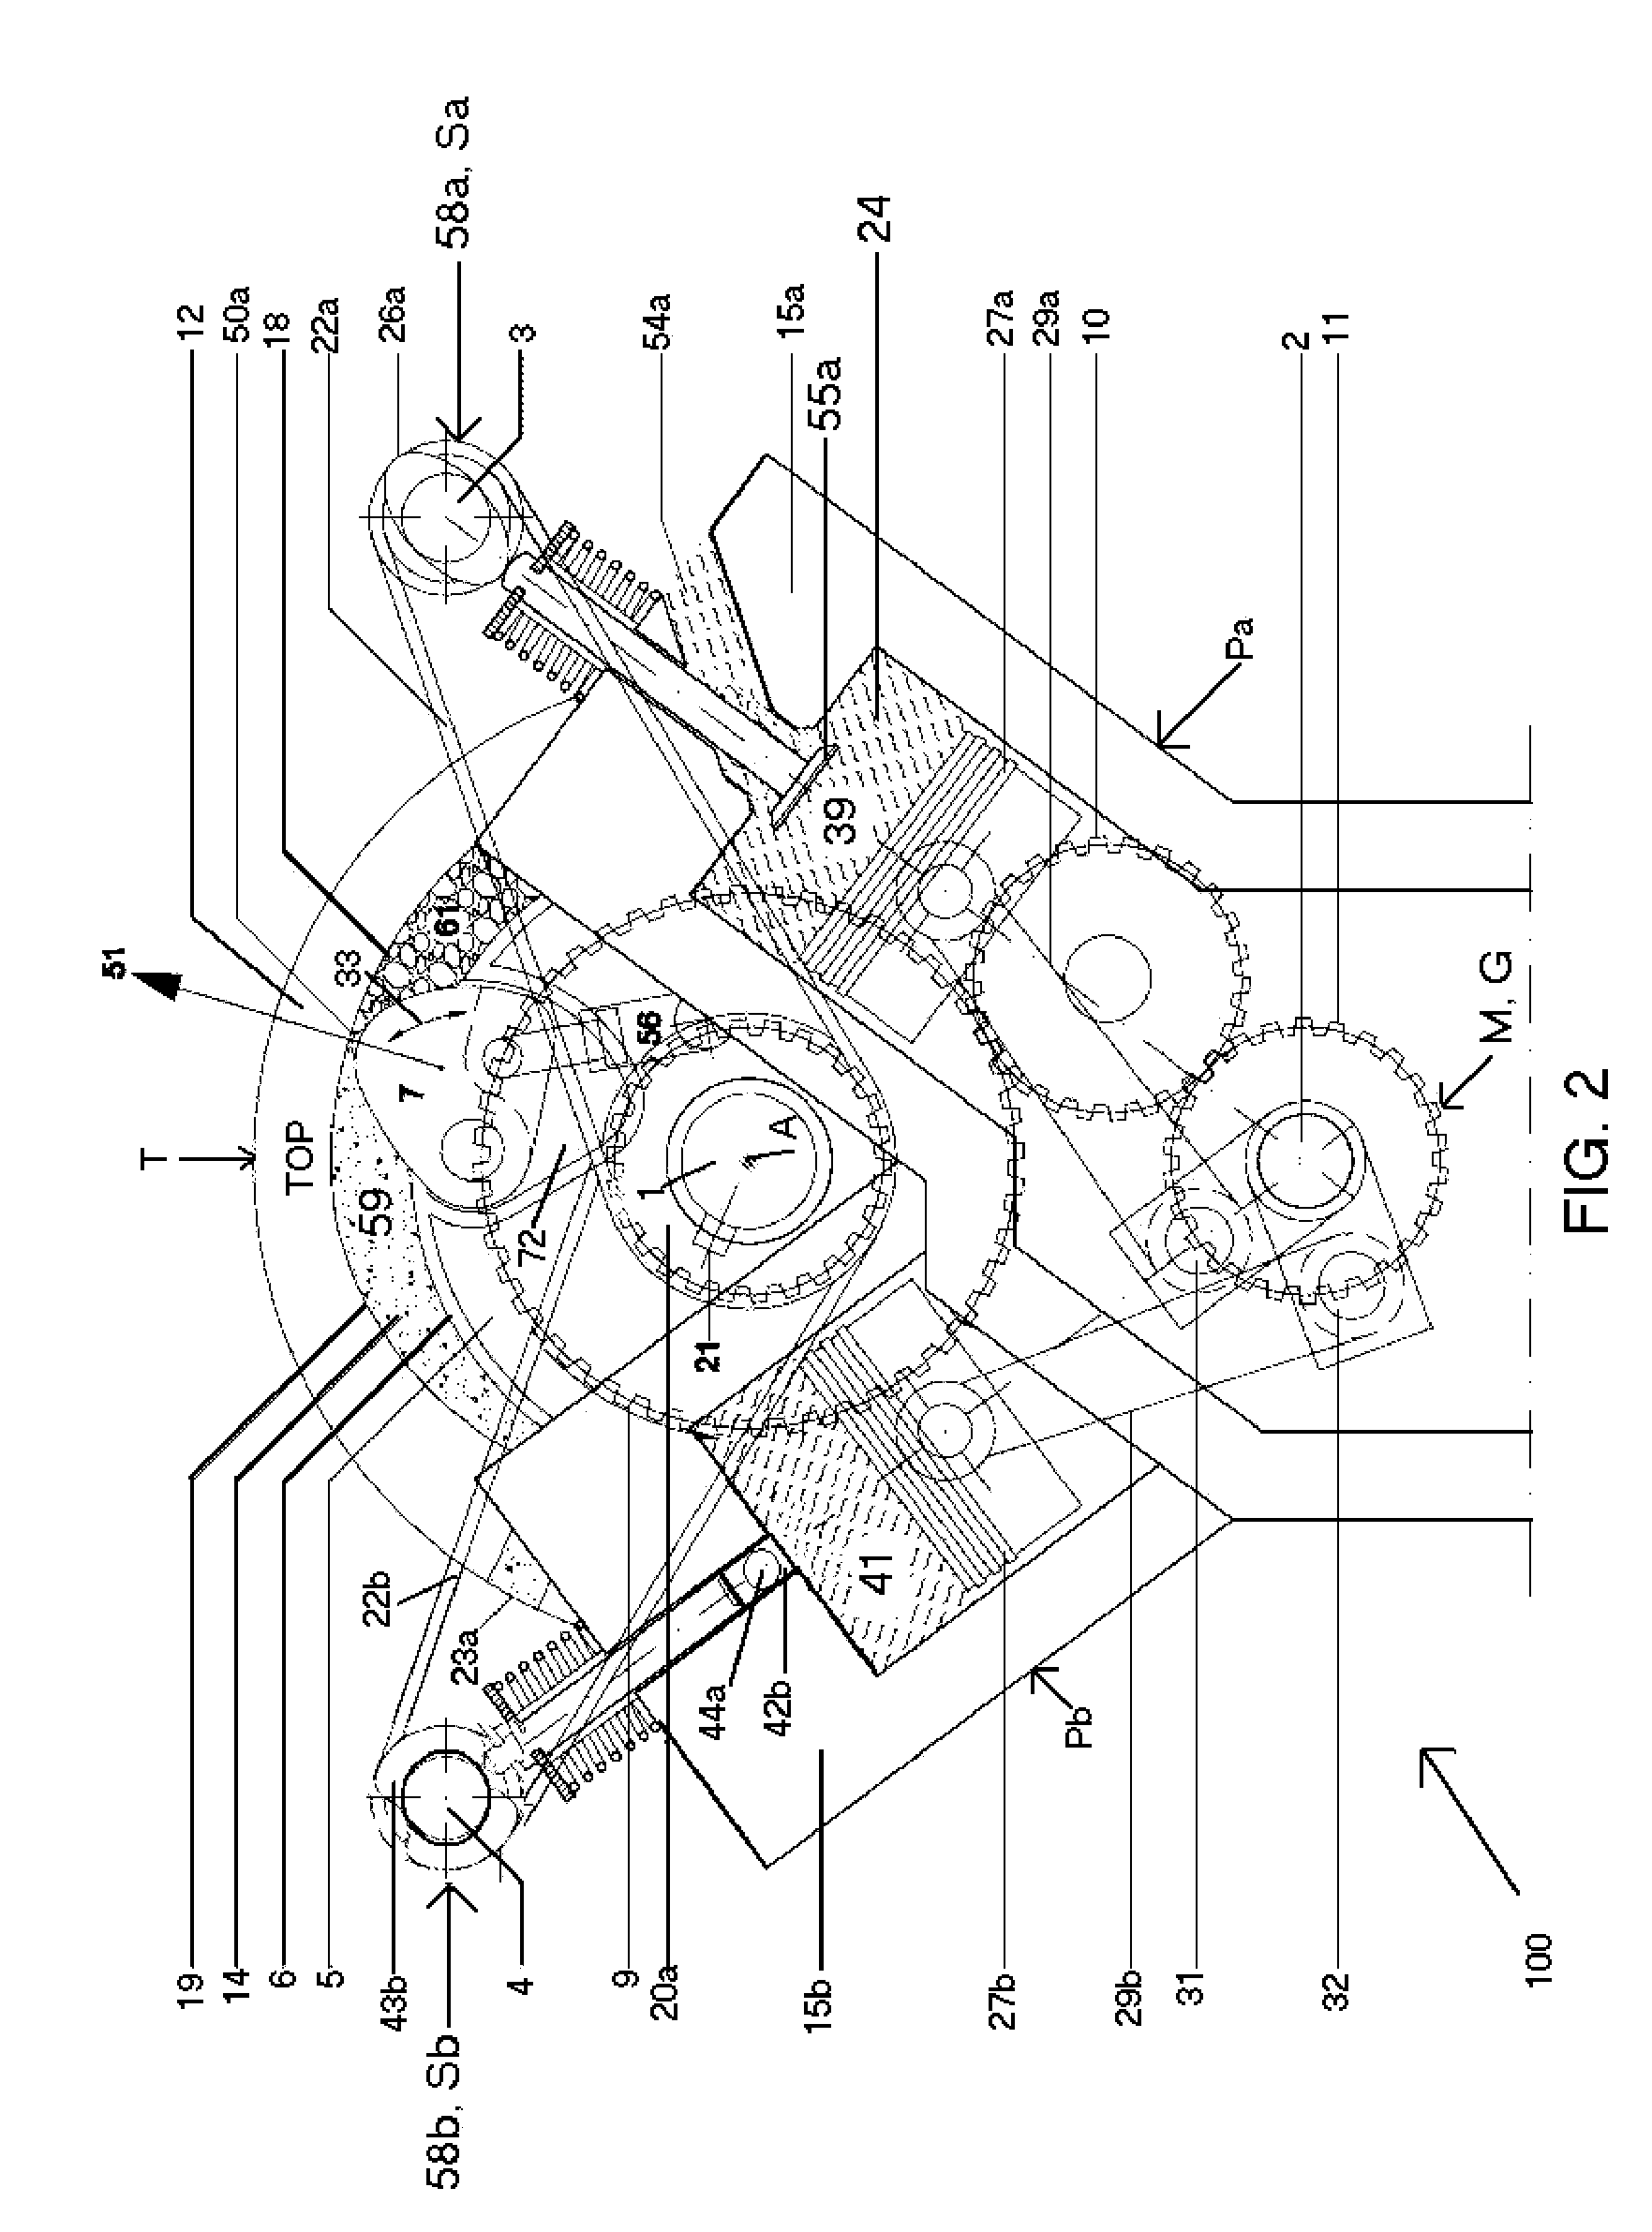 Combination Piston and Variable Blade Turbine Internal Combustion Engine